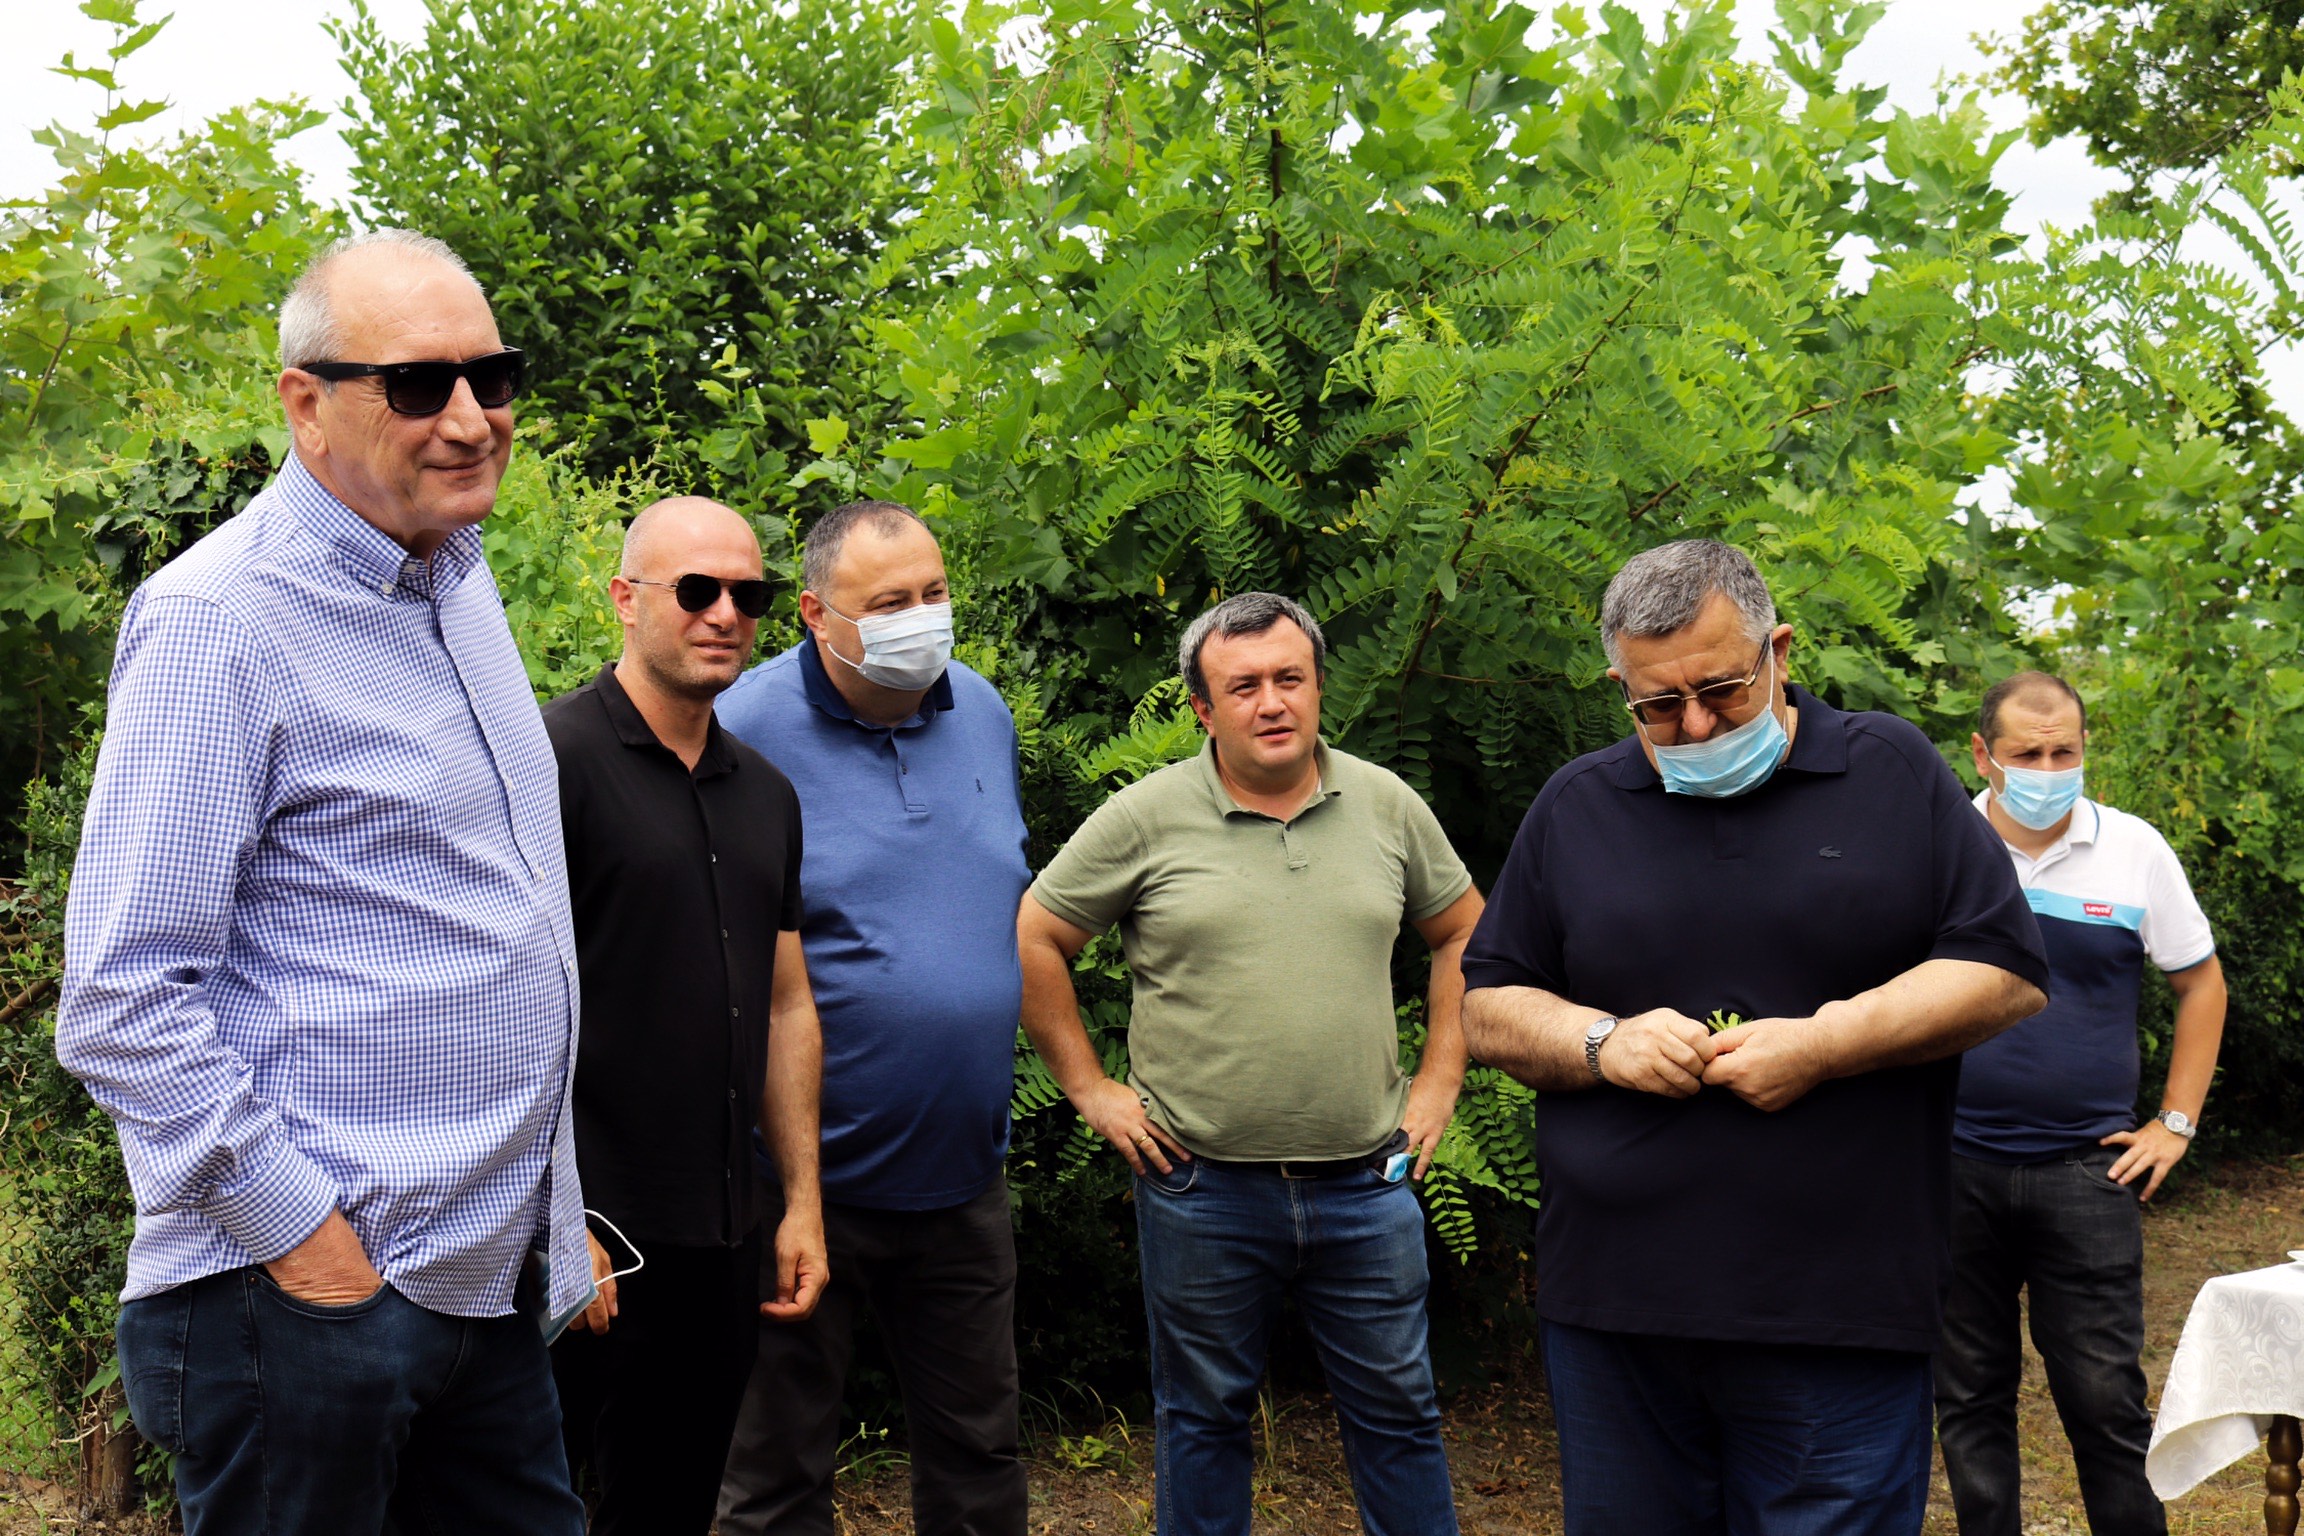 Giorgi Khanishvili: "Hazelnuts farmers were able to get a harvest that was unimaginable 2-3 years ago"